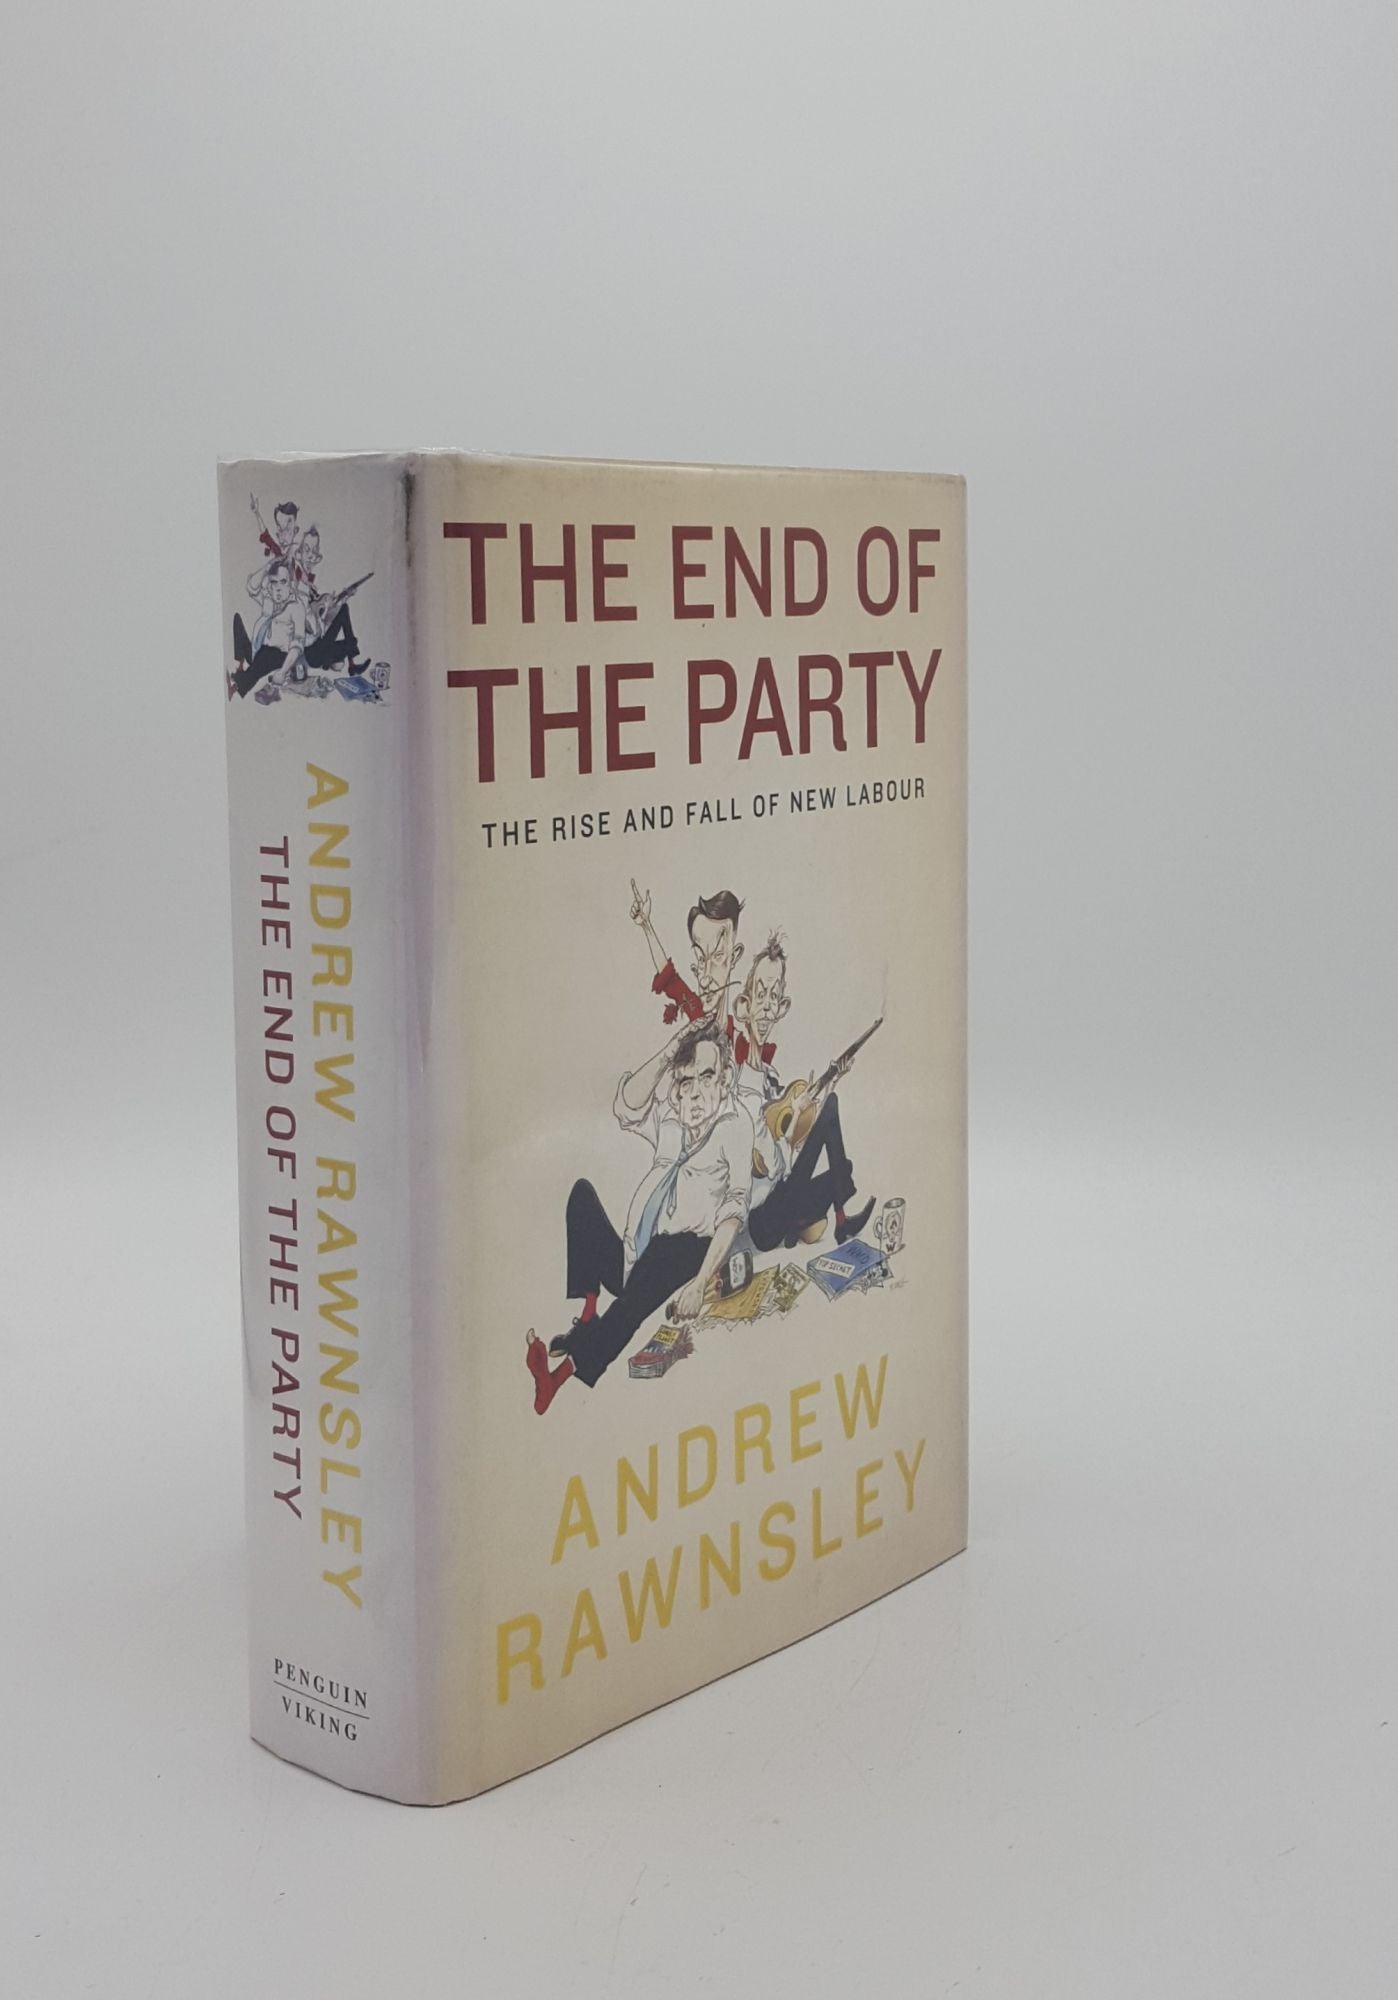 RAWNSLEY Andrew - The End of the Party the Rise and Fall of New Labour